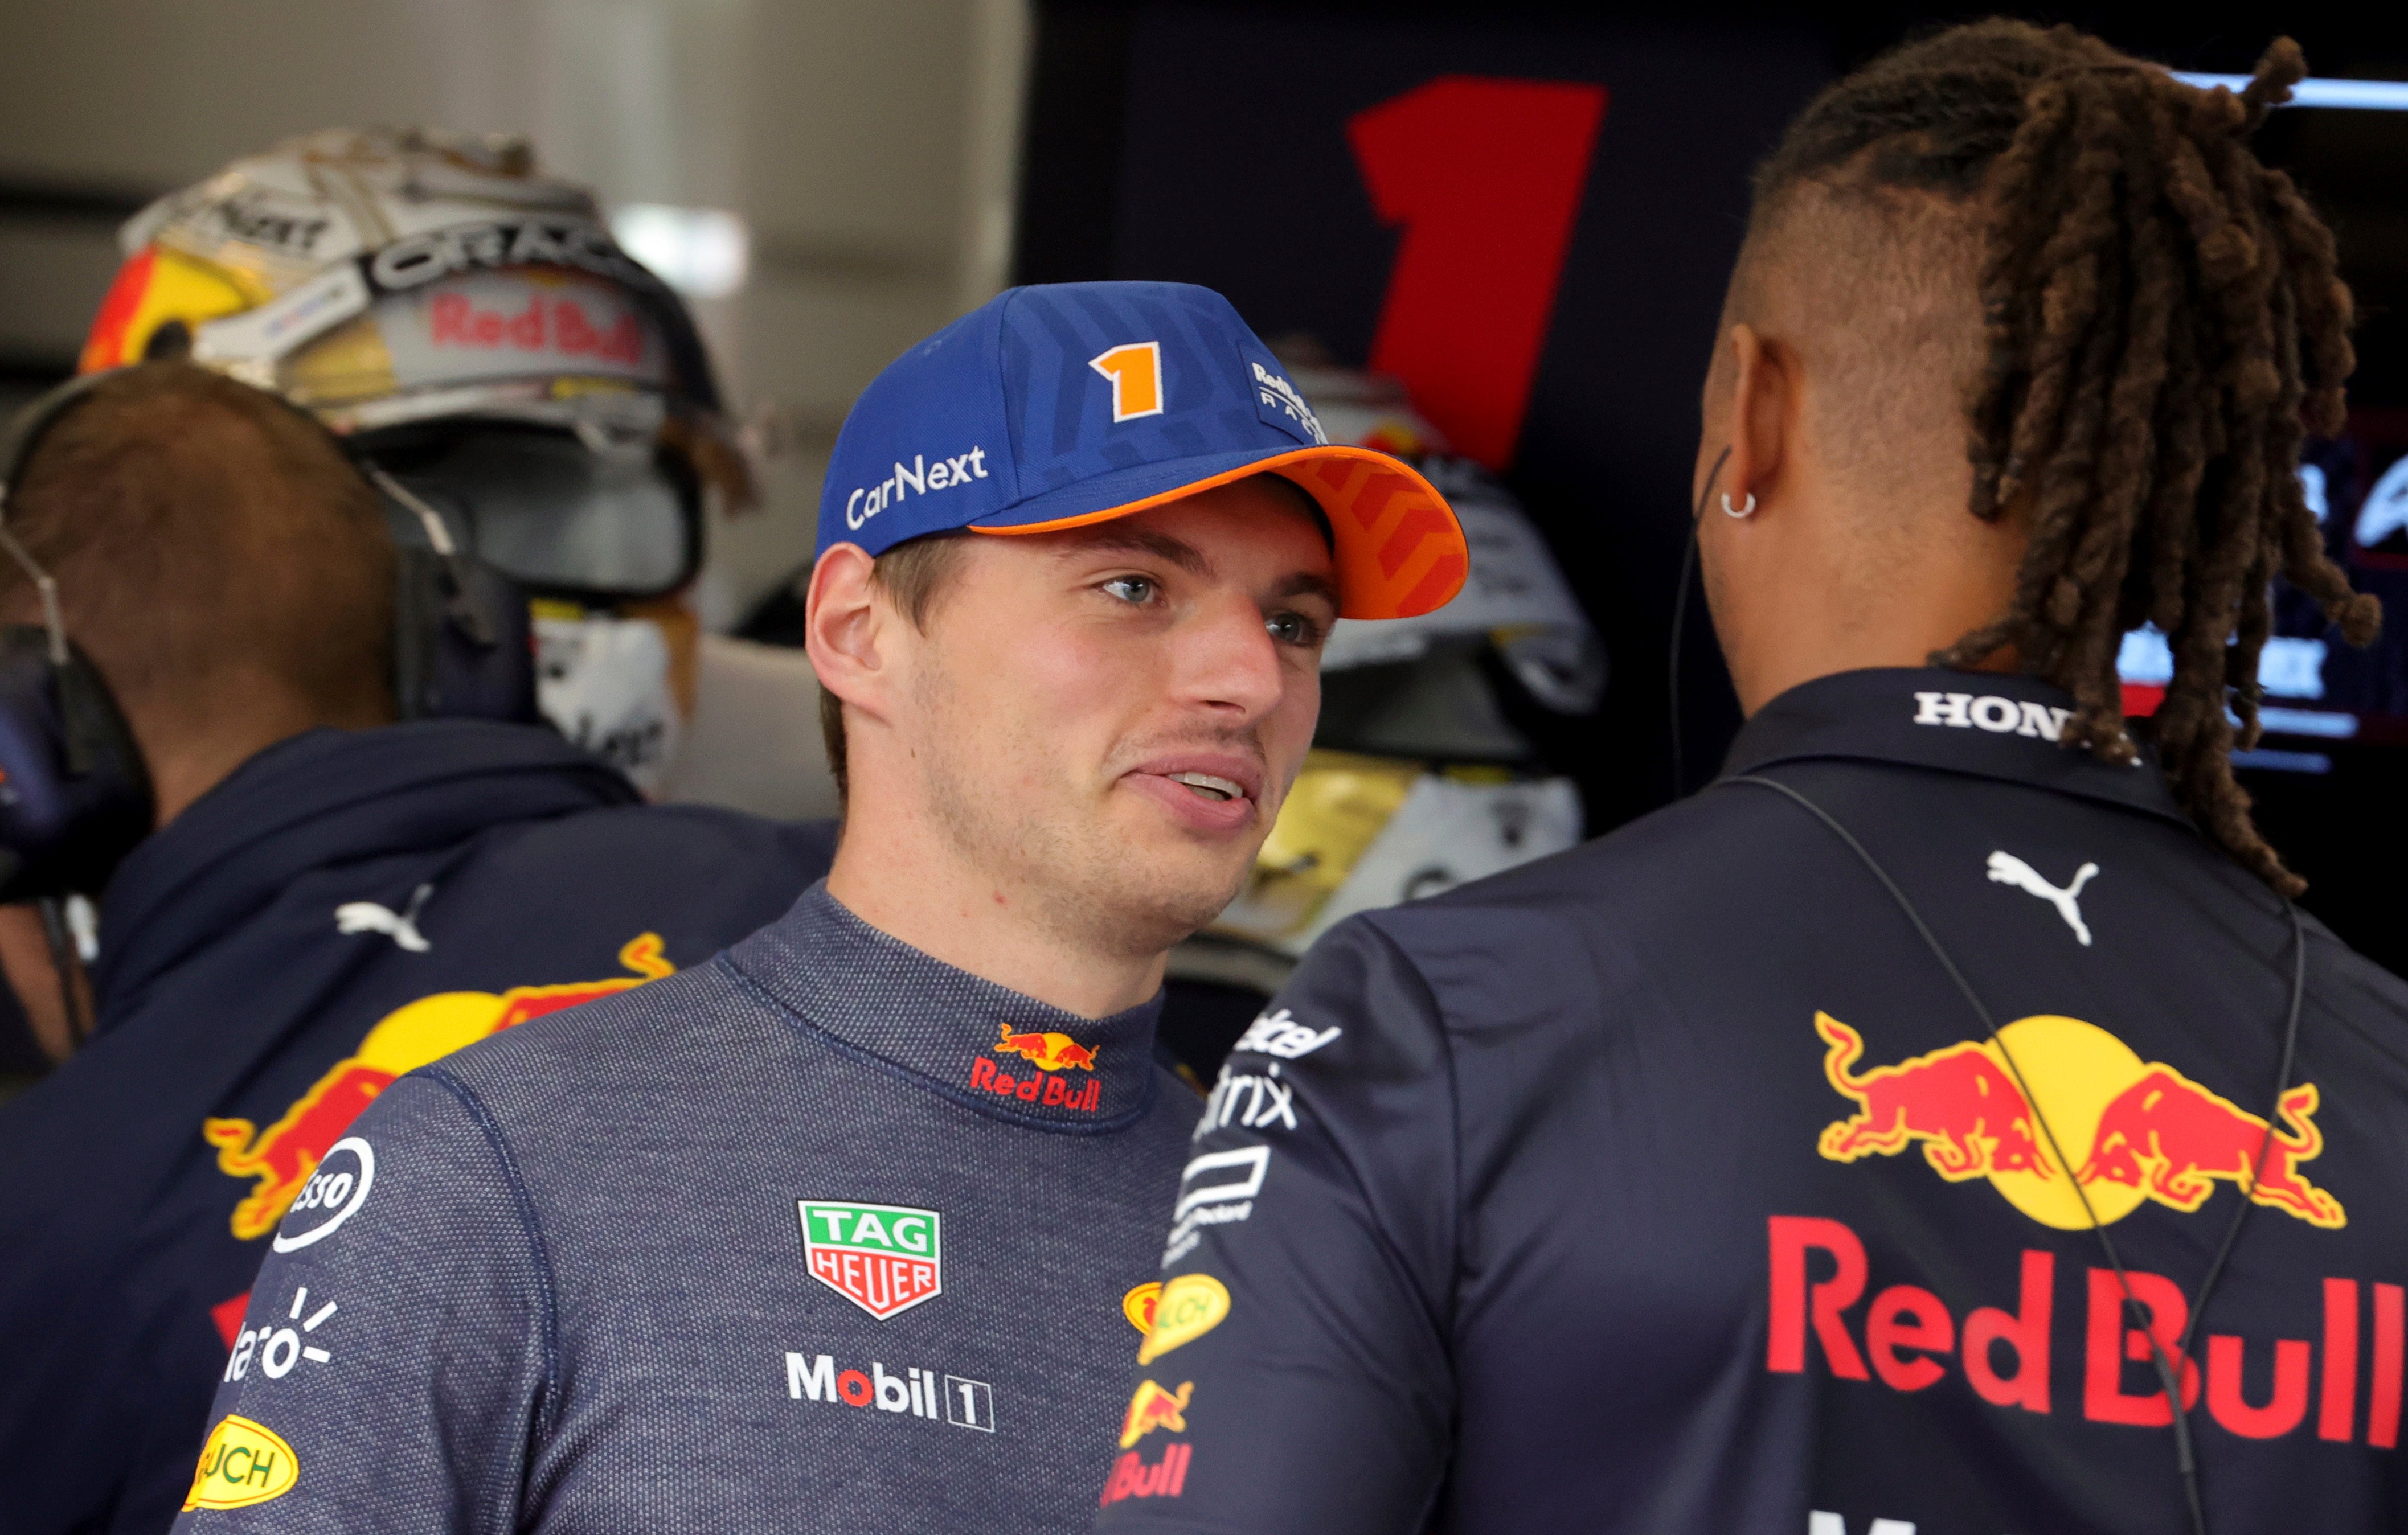 Max Verstappen (pictured) and Charles Leclerc were dealt grid penalties